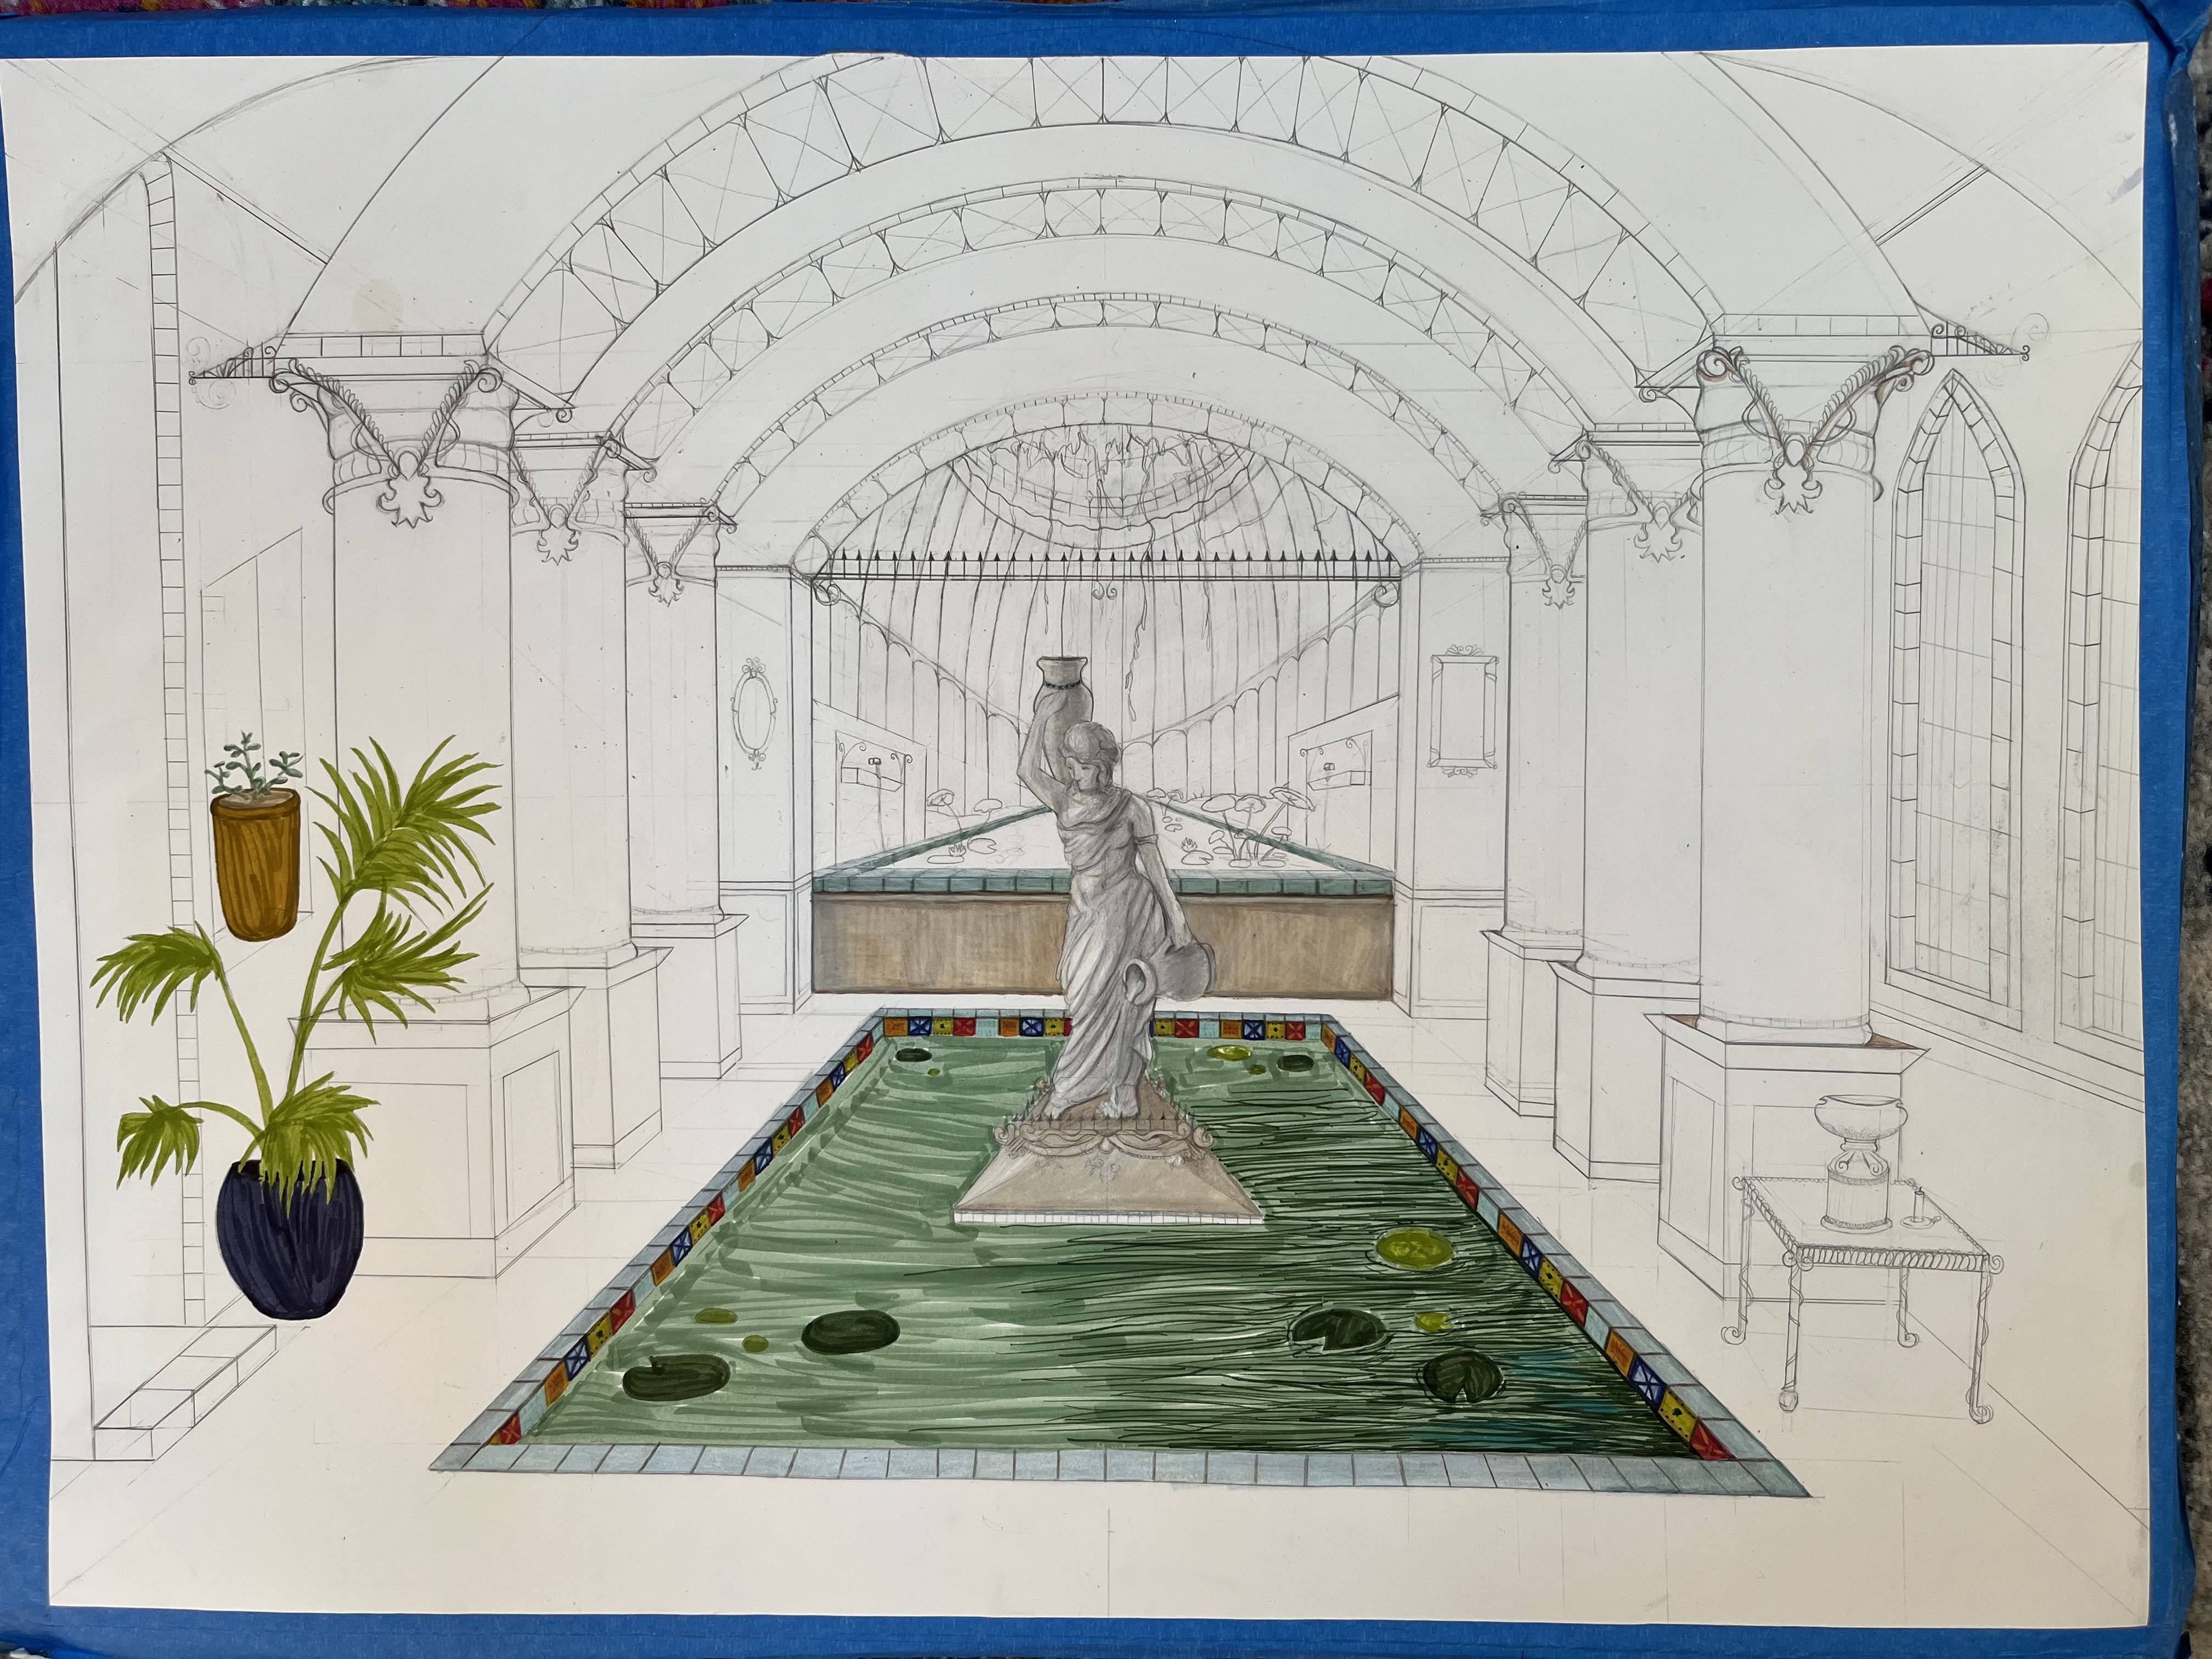 A drawing shows a statue in the middle of a green floor under columns, next to a green plant.